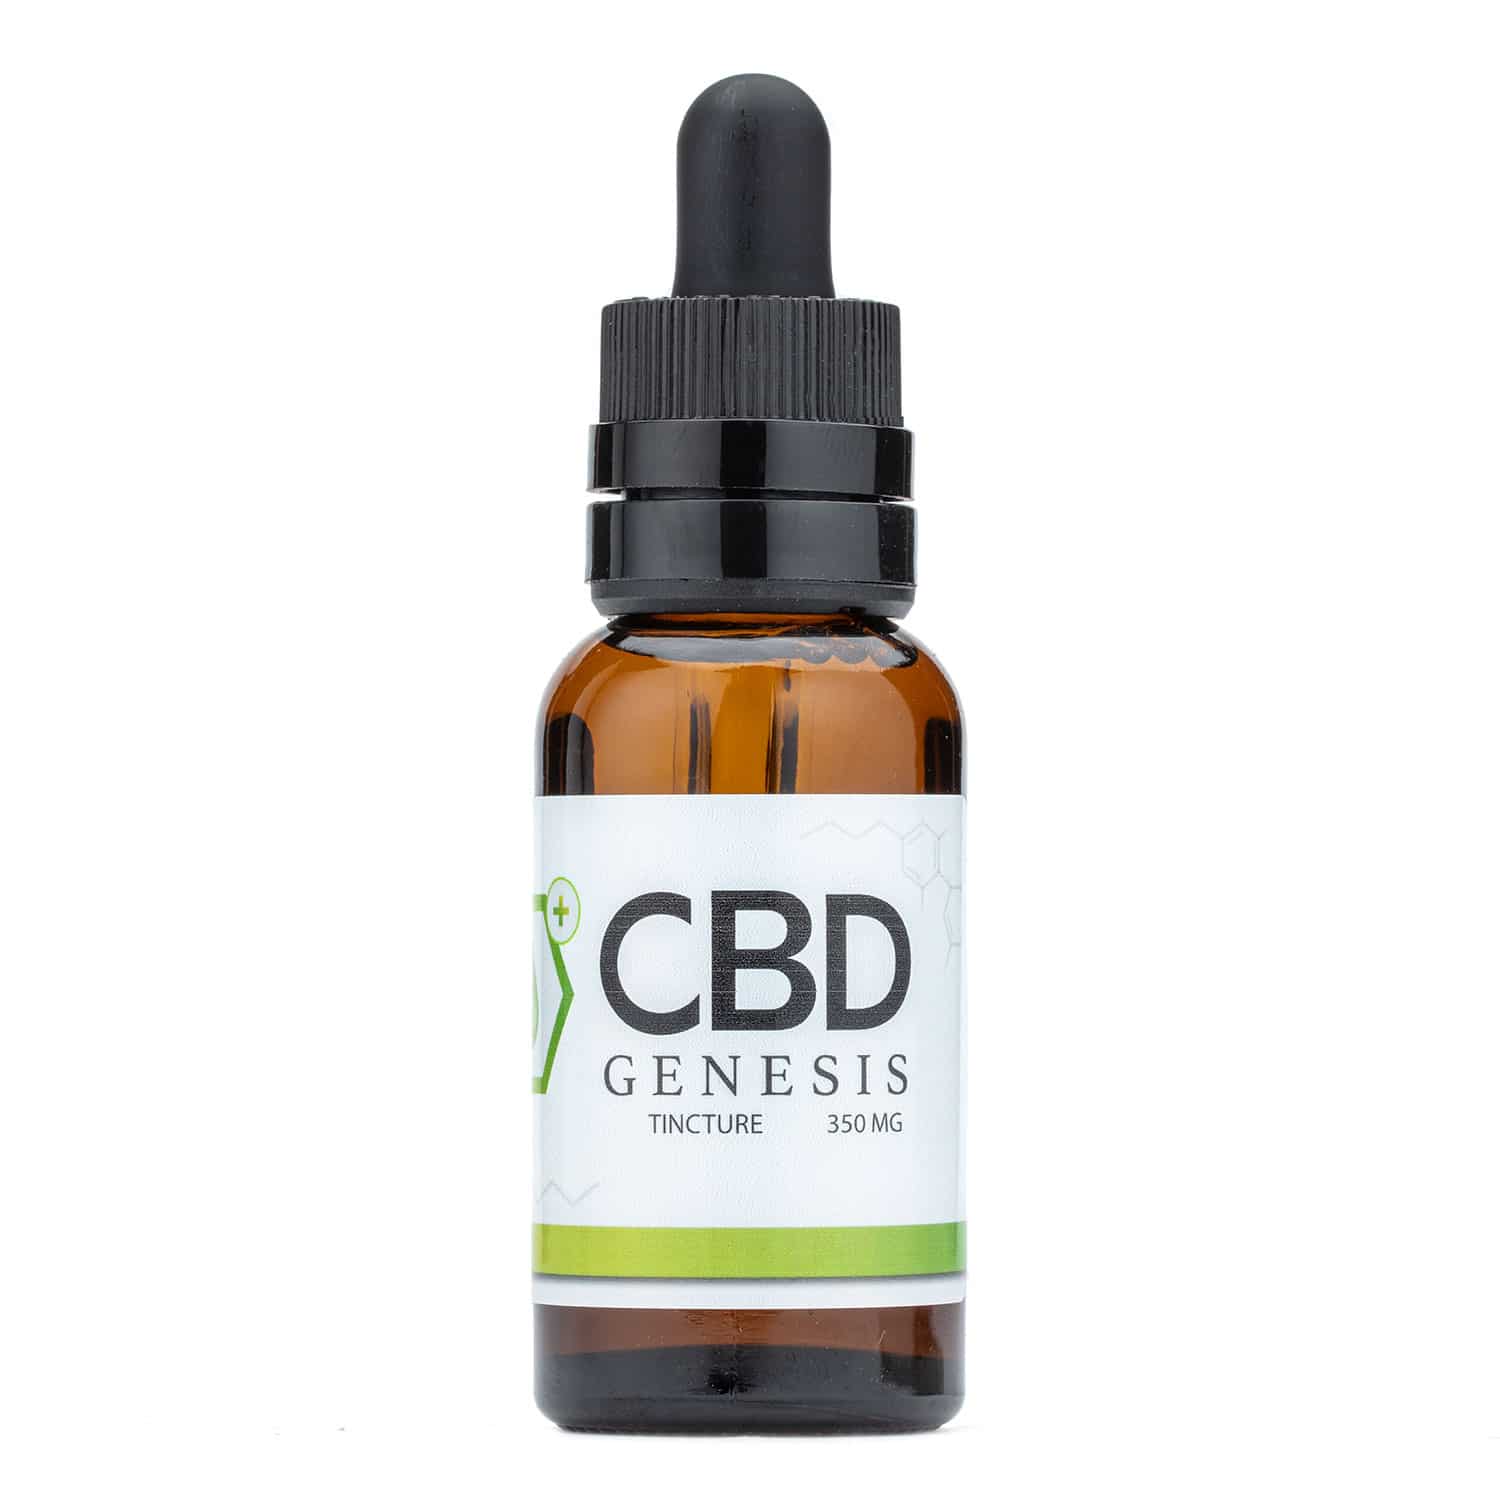 What Stores Near Luverne Mn Carry Cbd Oil